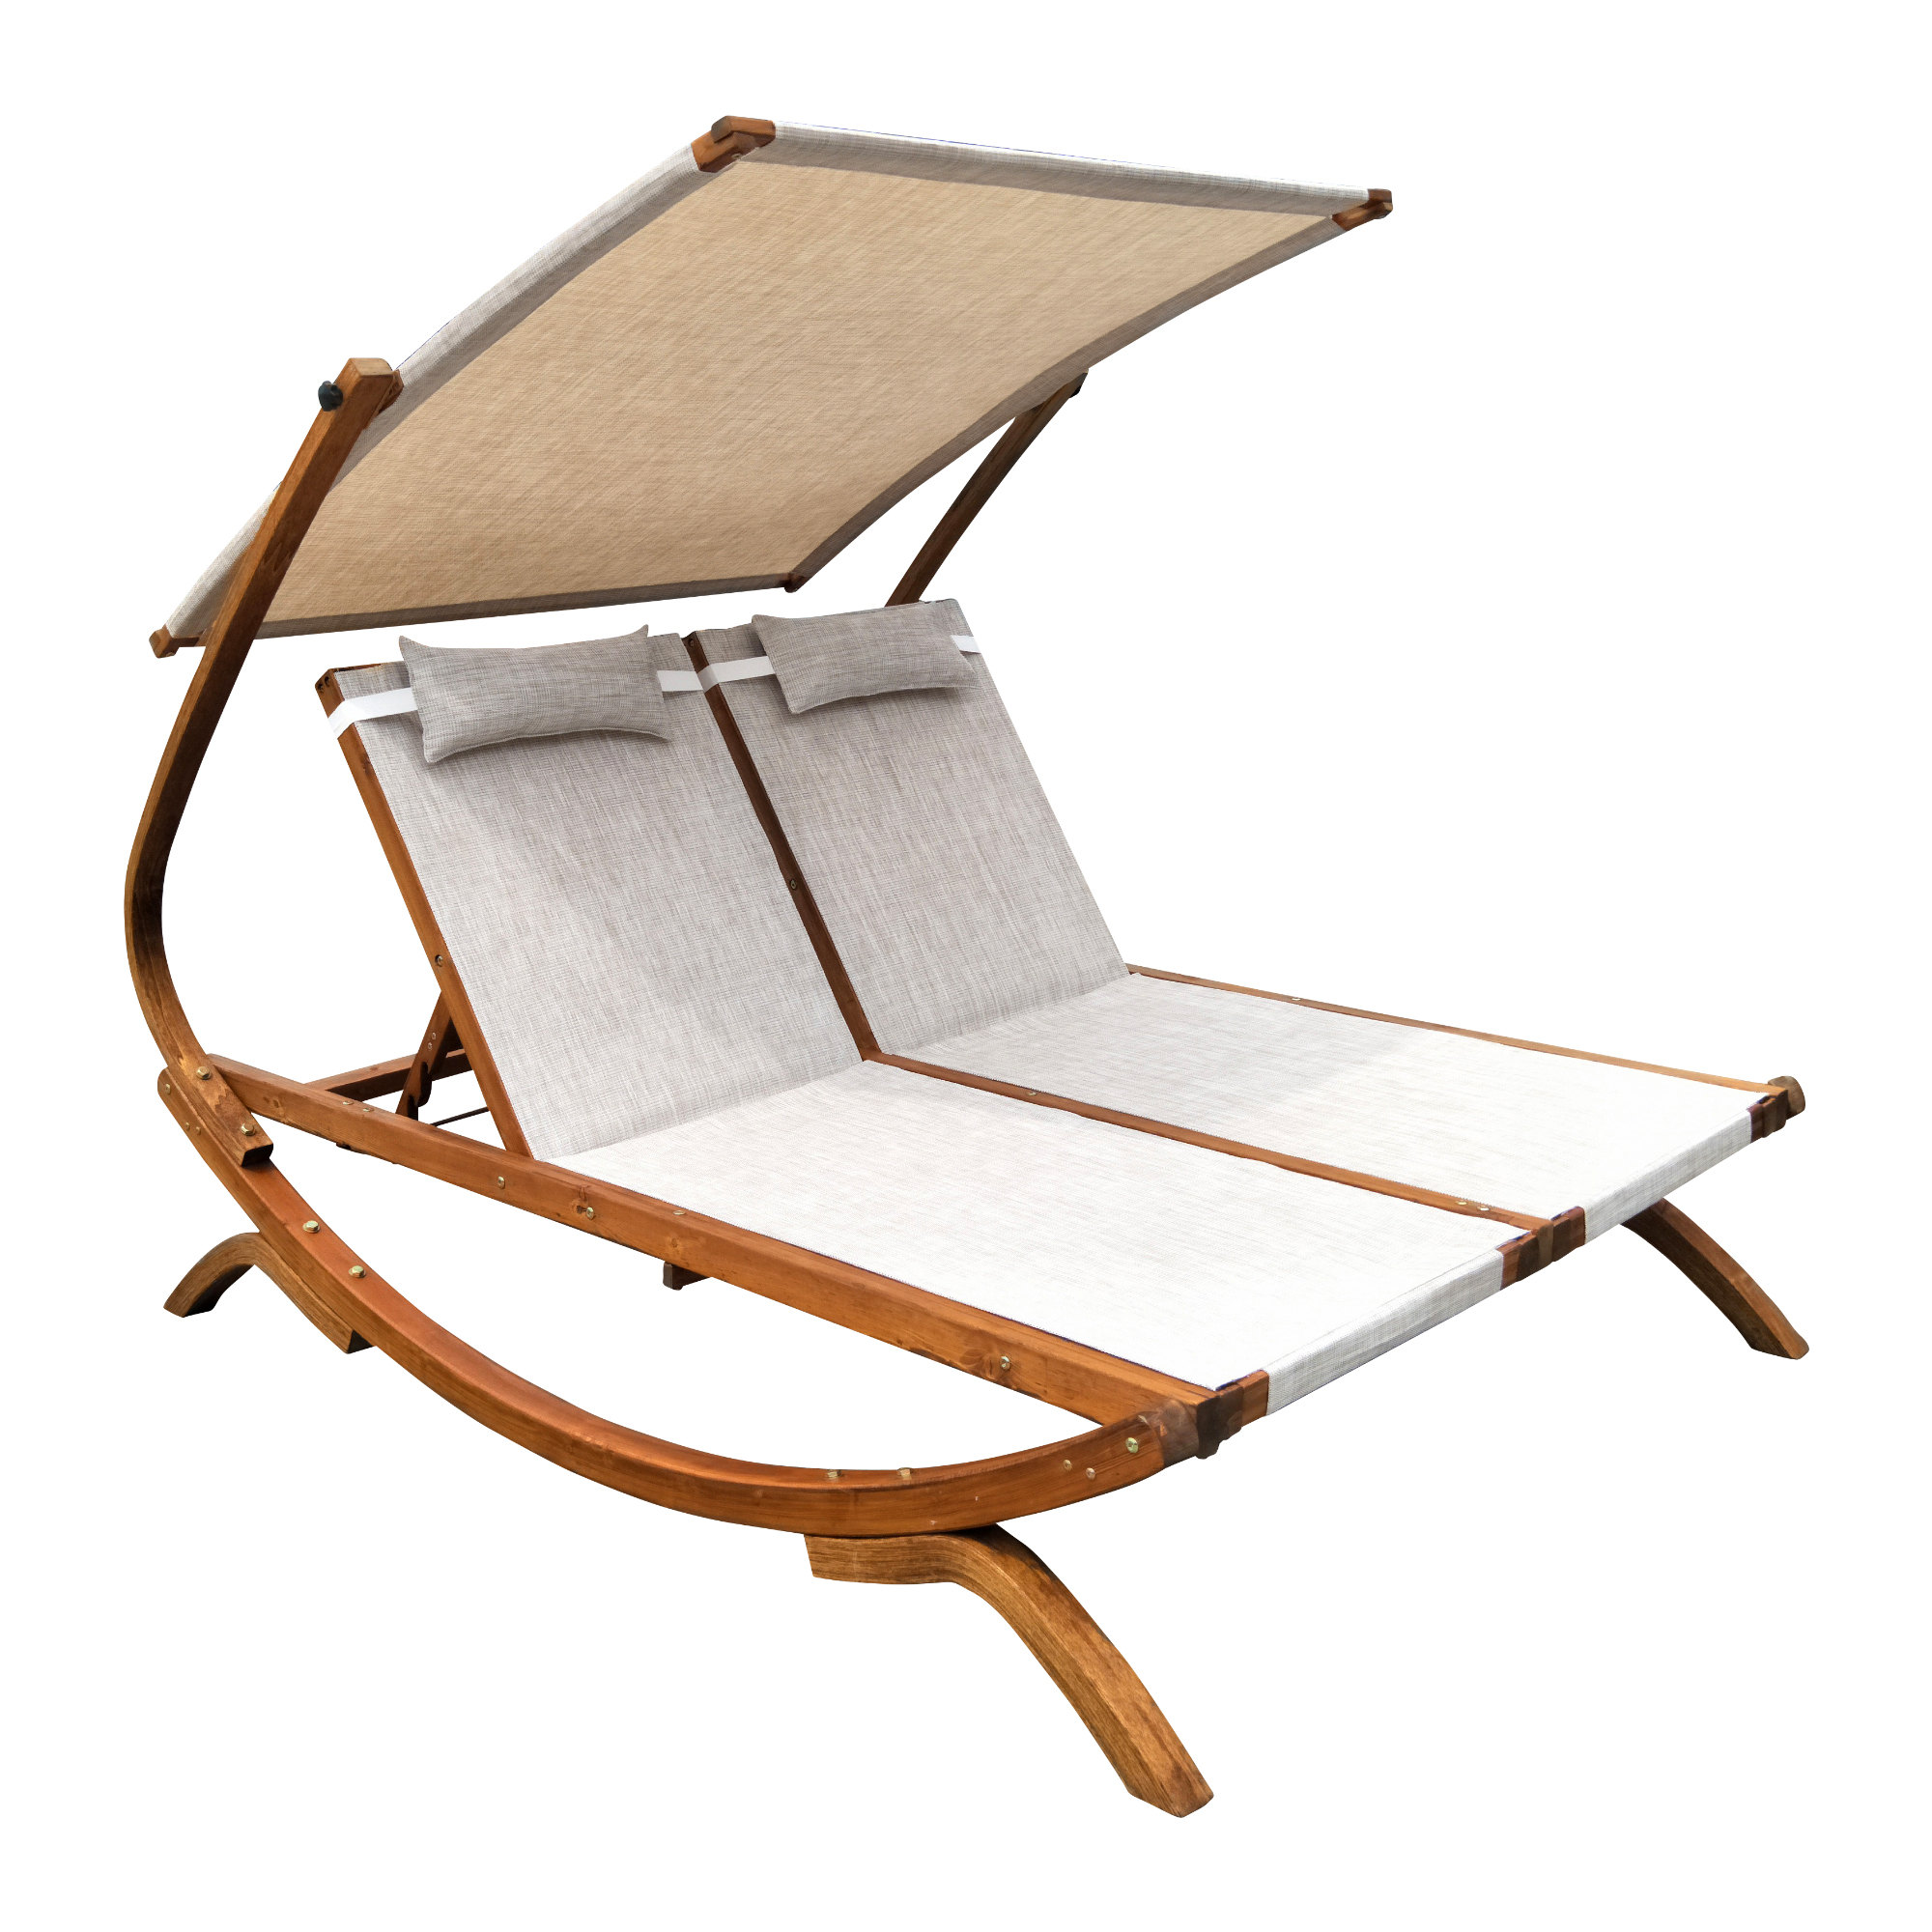 Leisure Season Ltd - Double Reclining Lounge Chair with Canopy